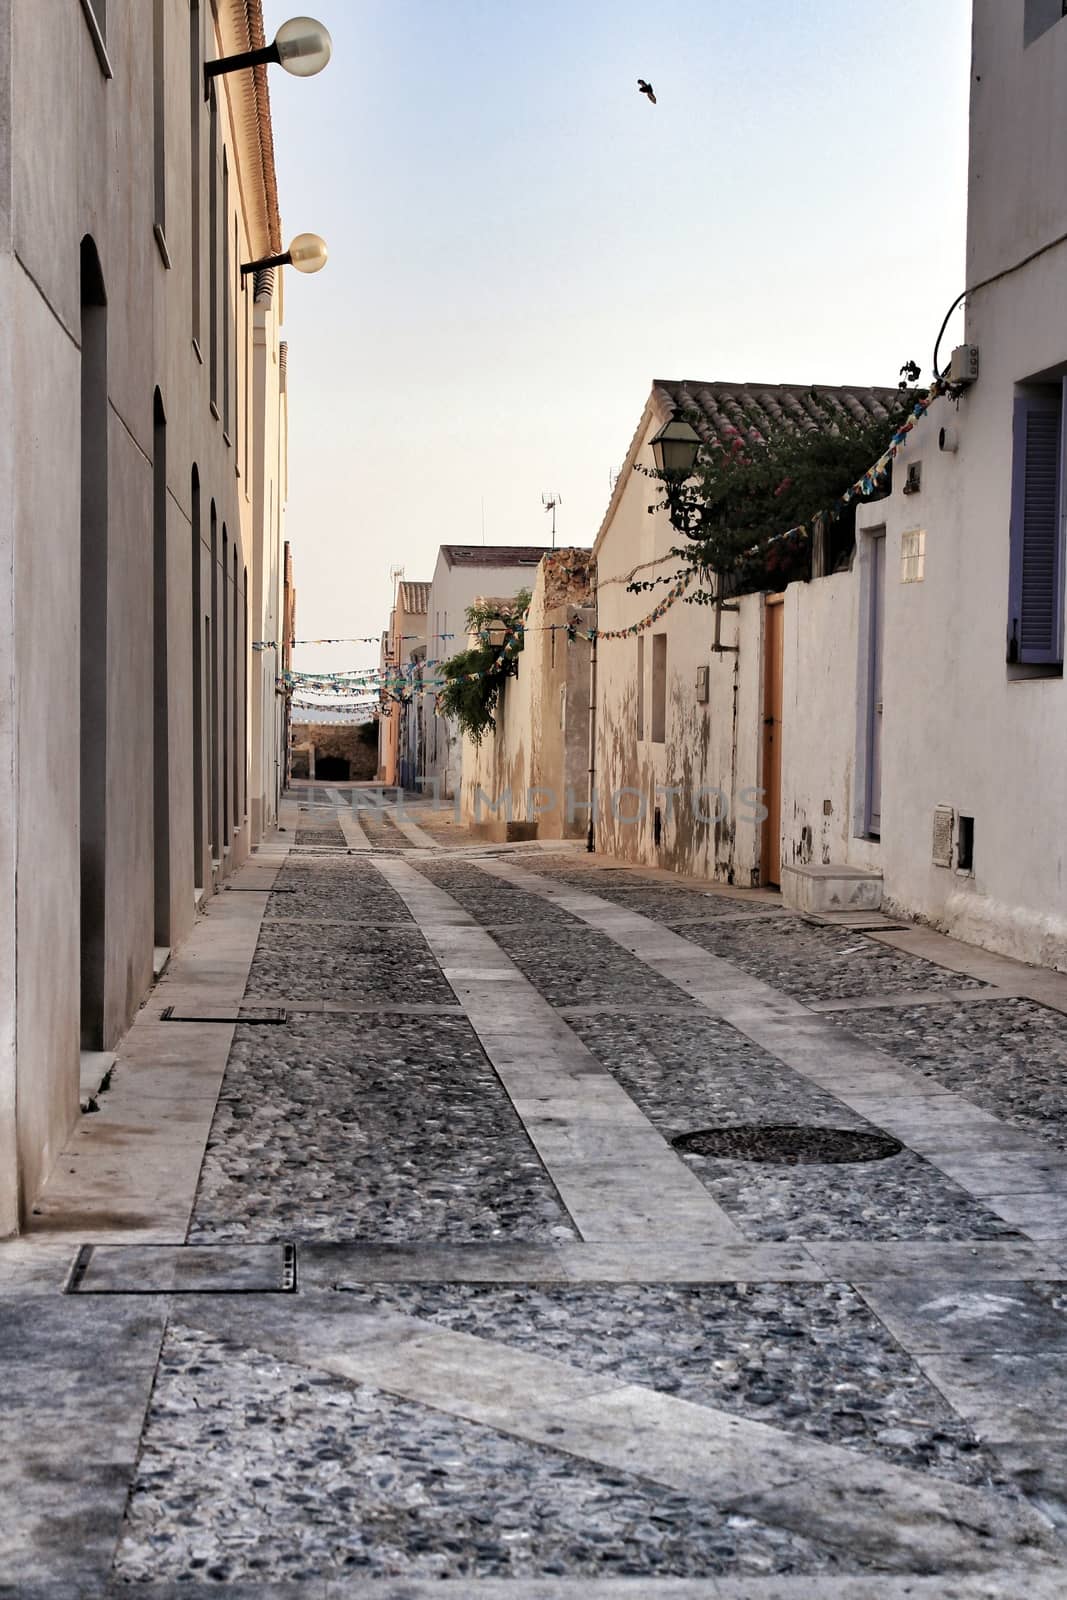 Narrow Streets and small houses of Tabarca Island in Alicante, Spain